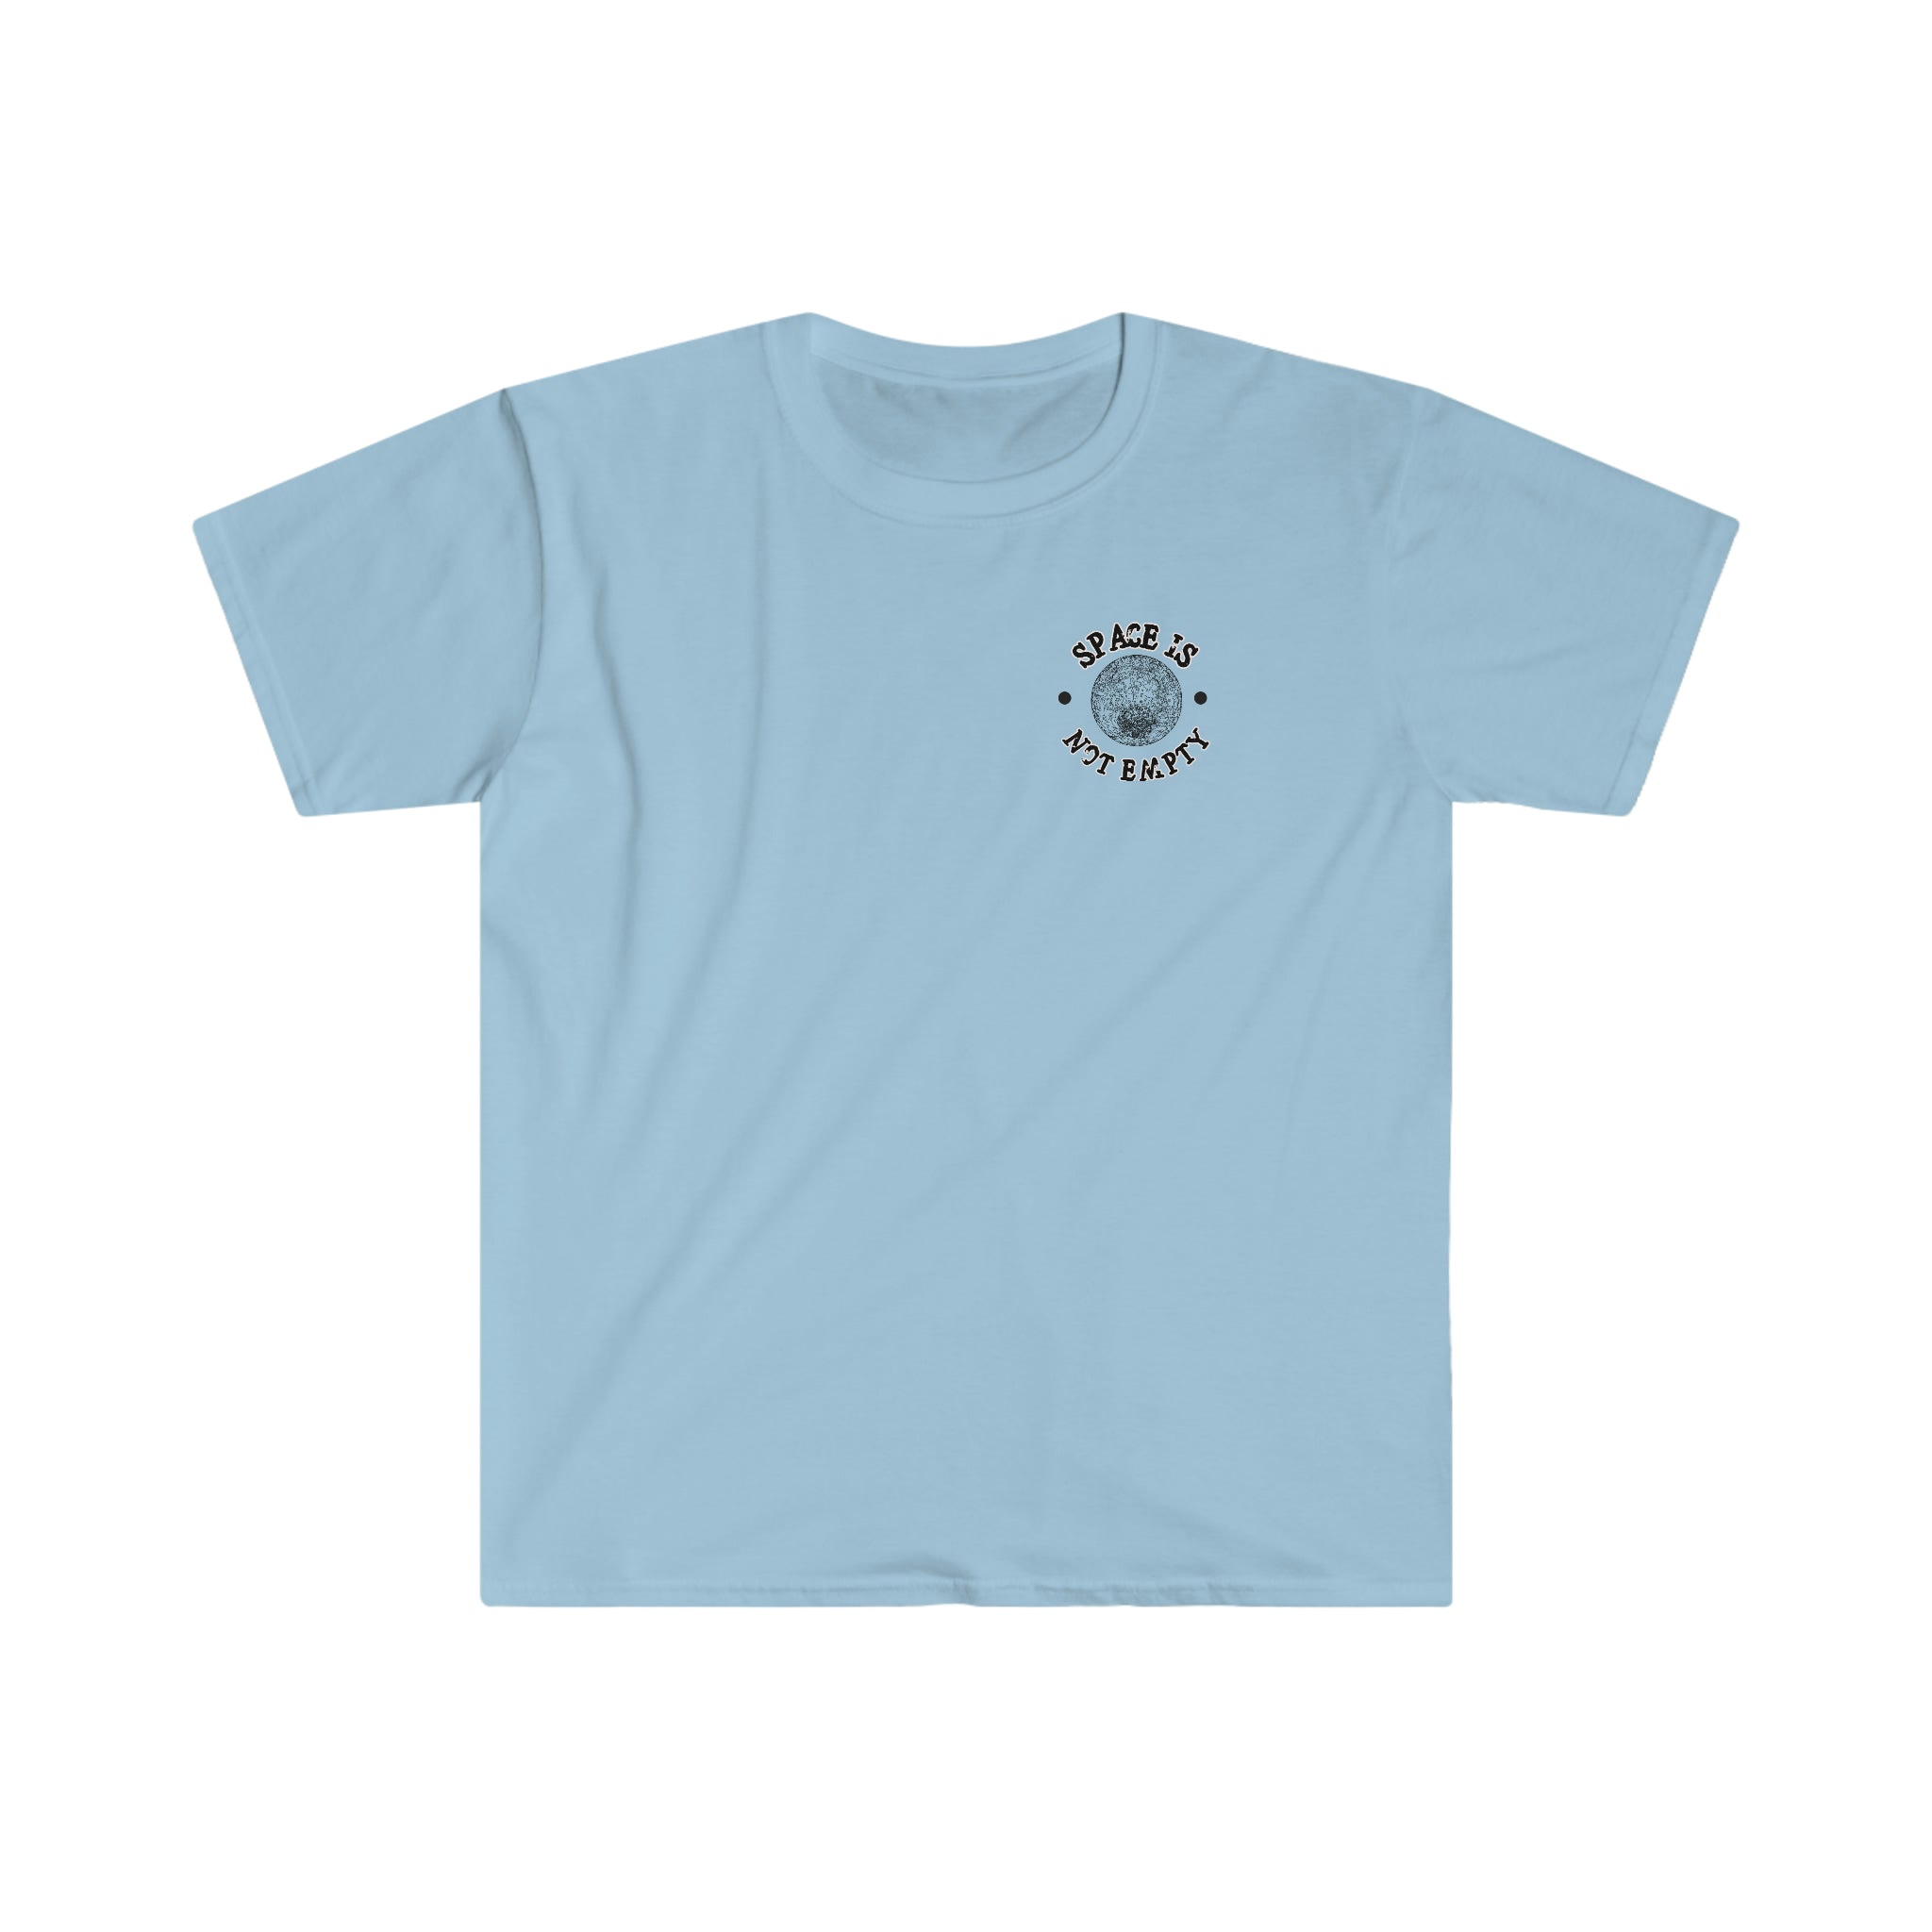 A light blue Space Station T-Shirt with a circle on it, perfect for space station fans.